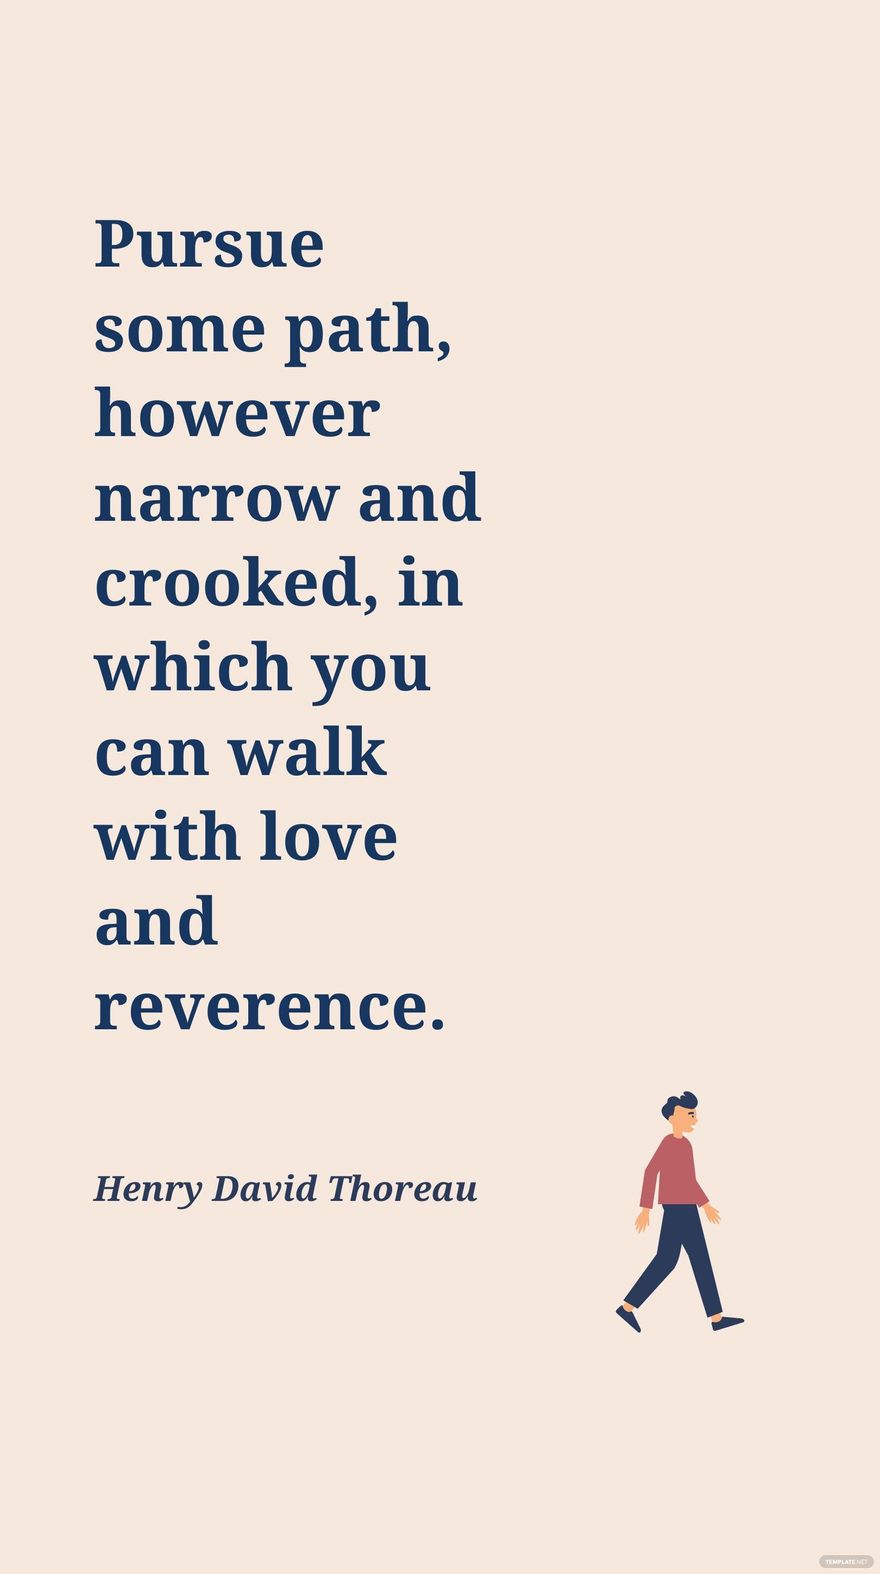 Henry David Thoreau - Pursue some path, however narrow and crooked, in which you can walk with love and reverence.